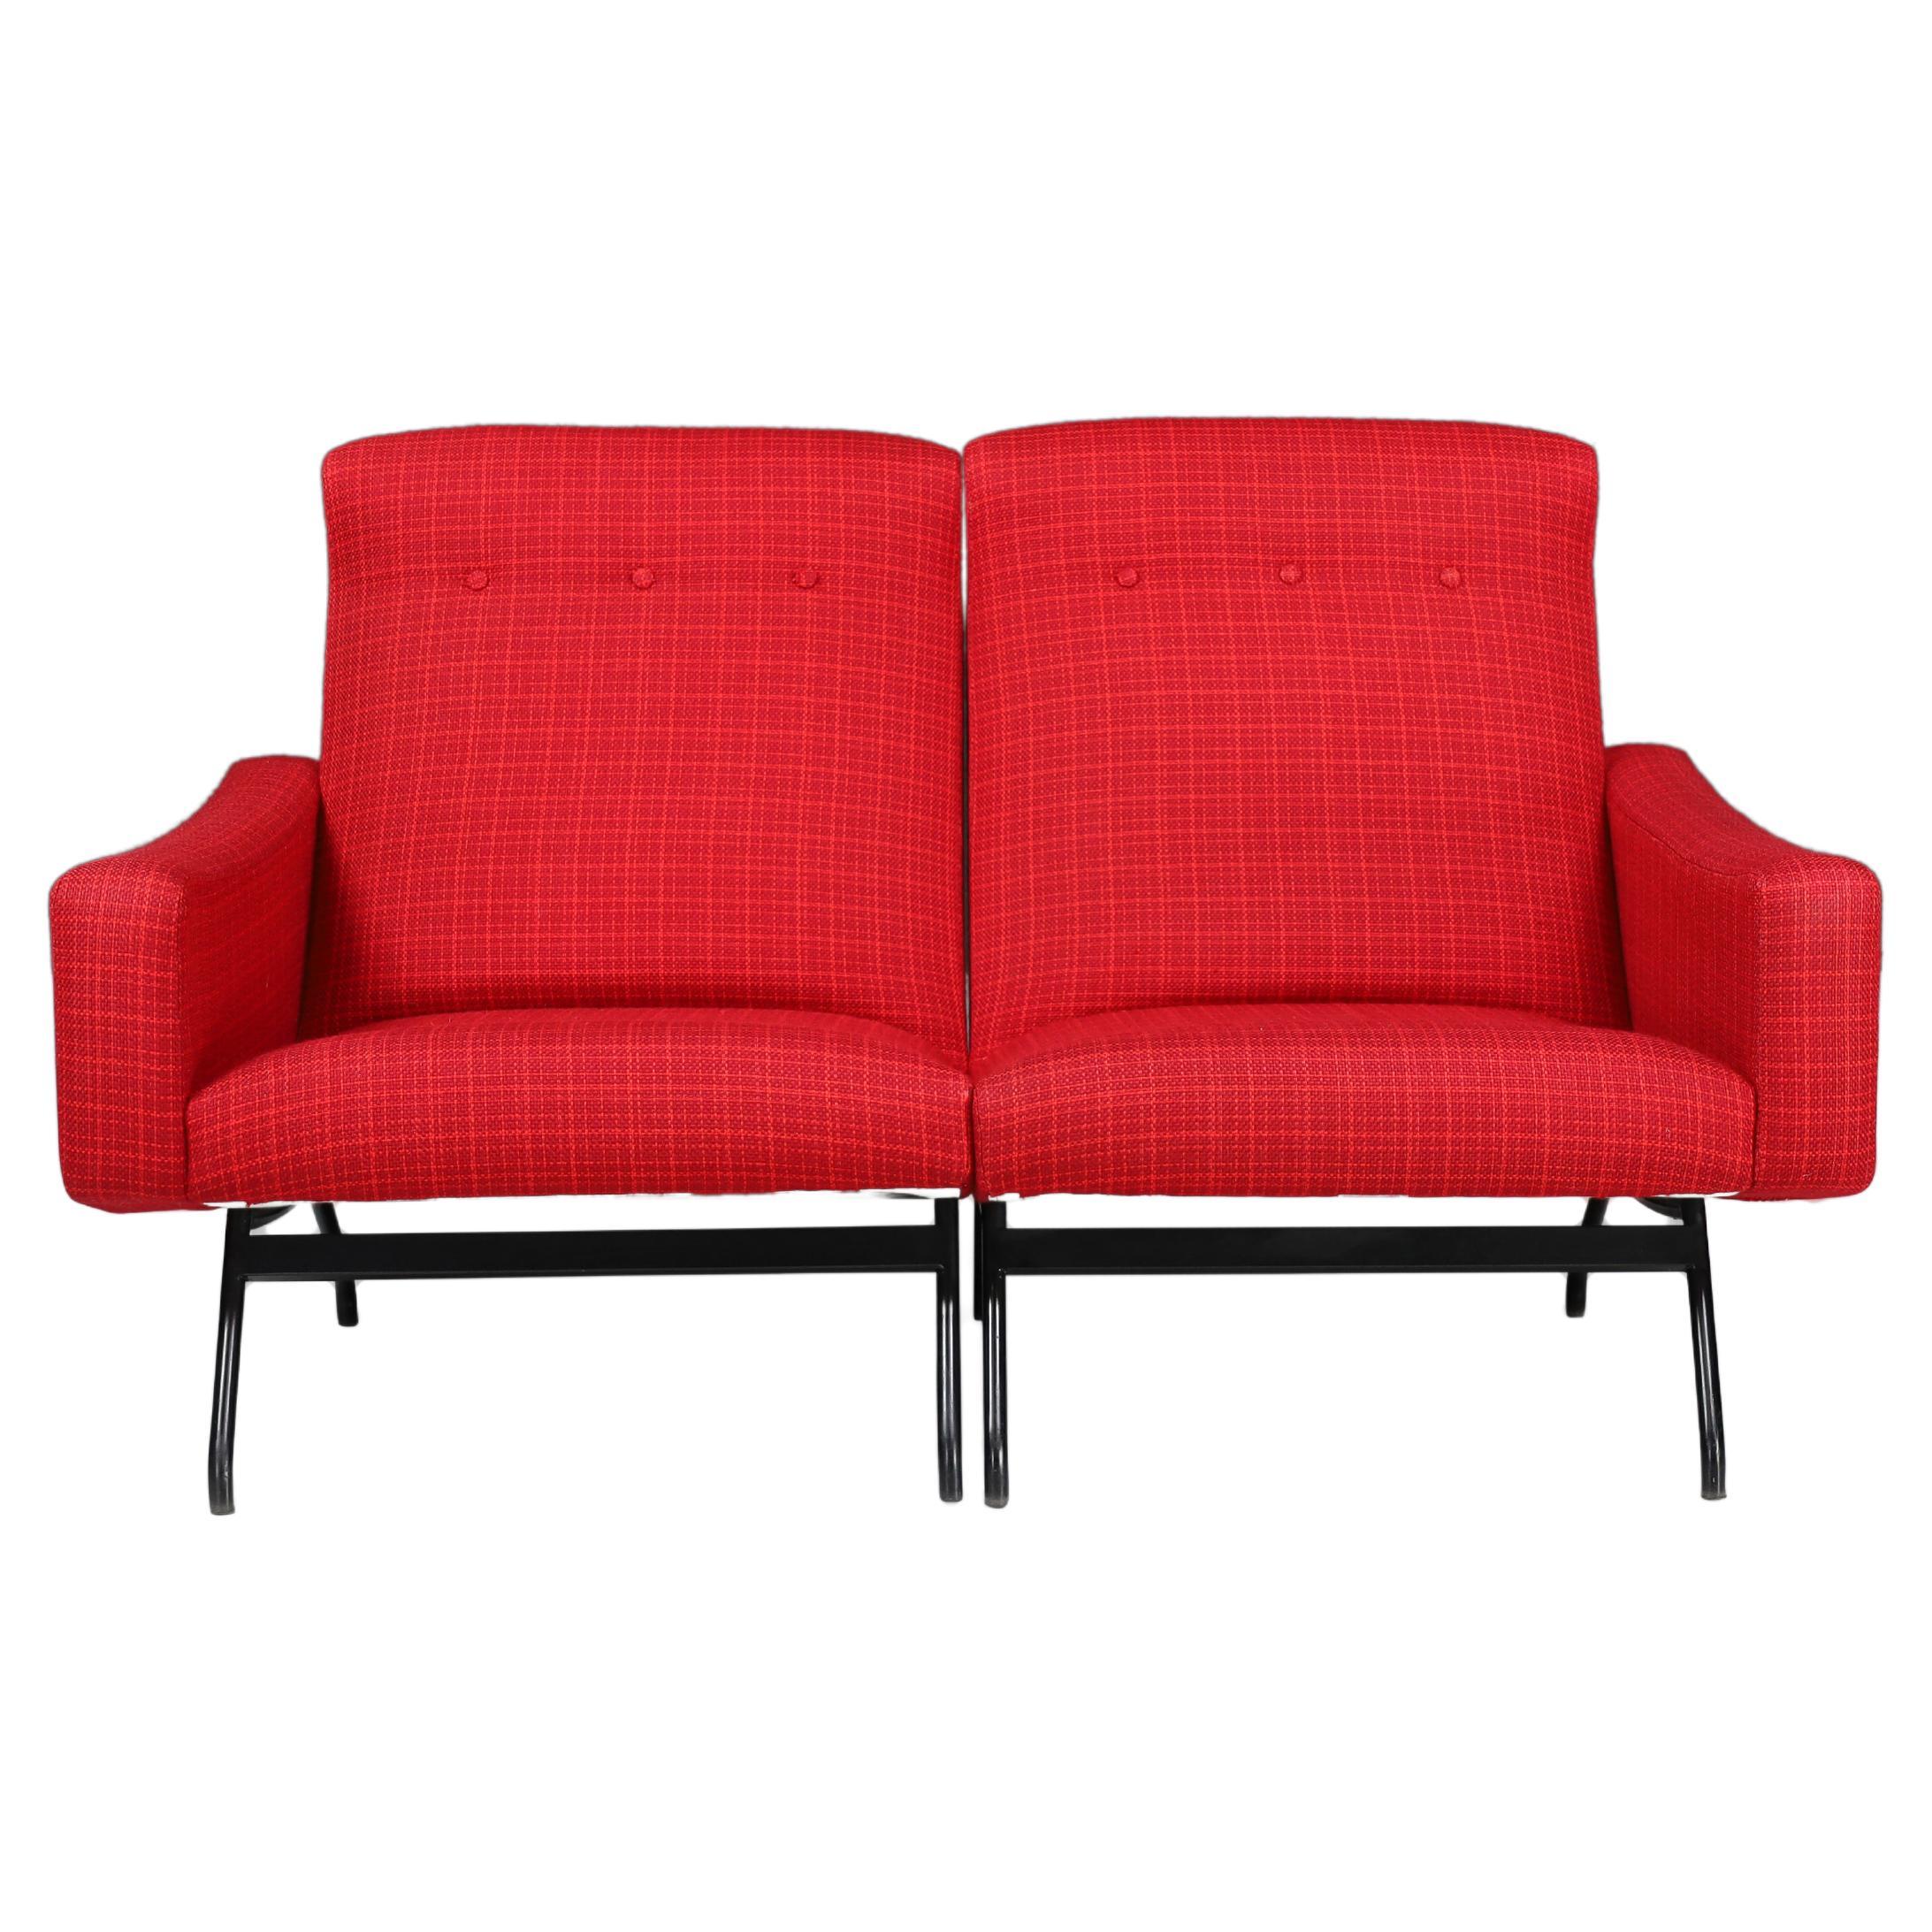 Joseph-andré Motte Sectional Sofa Two Seat Red Original Upholstery France, 1950 For Sale